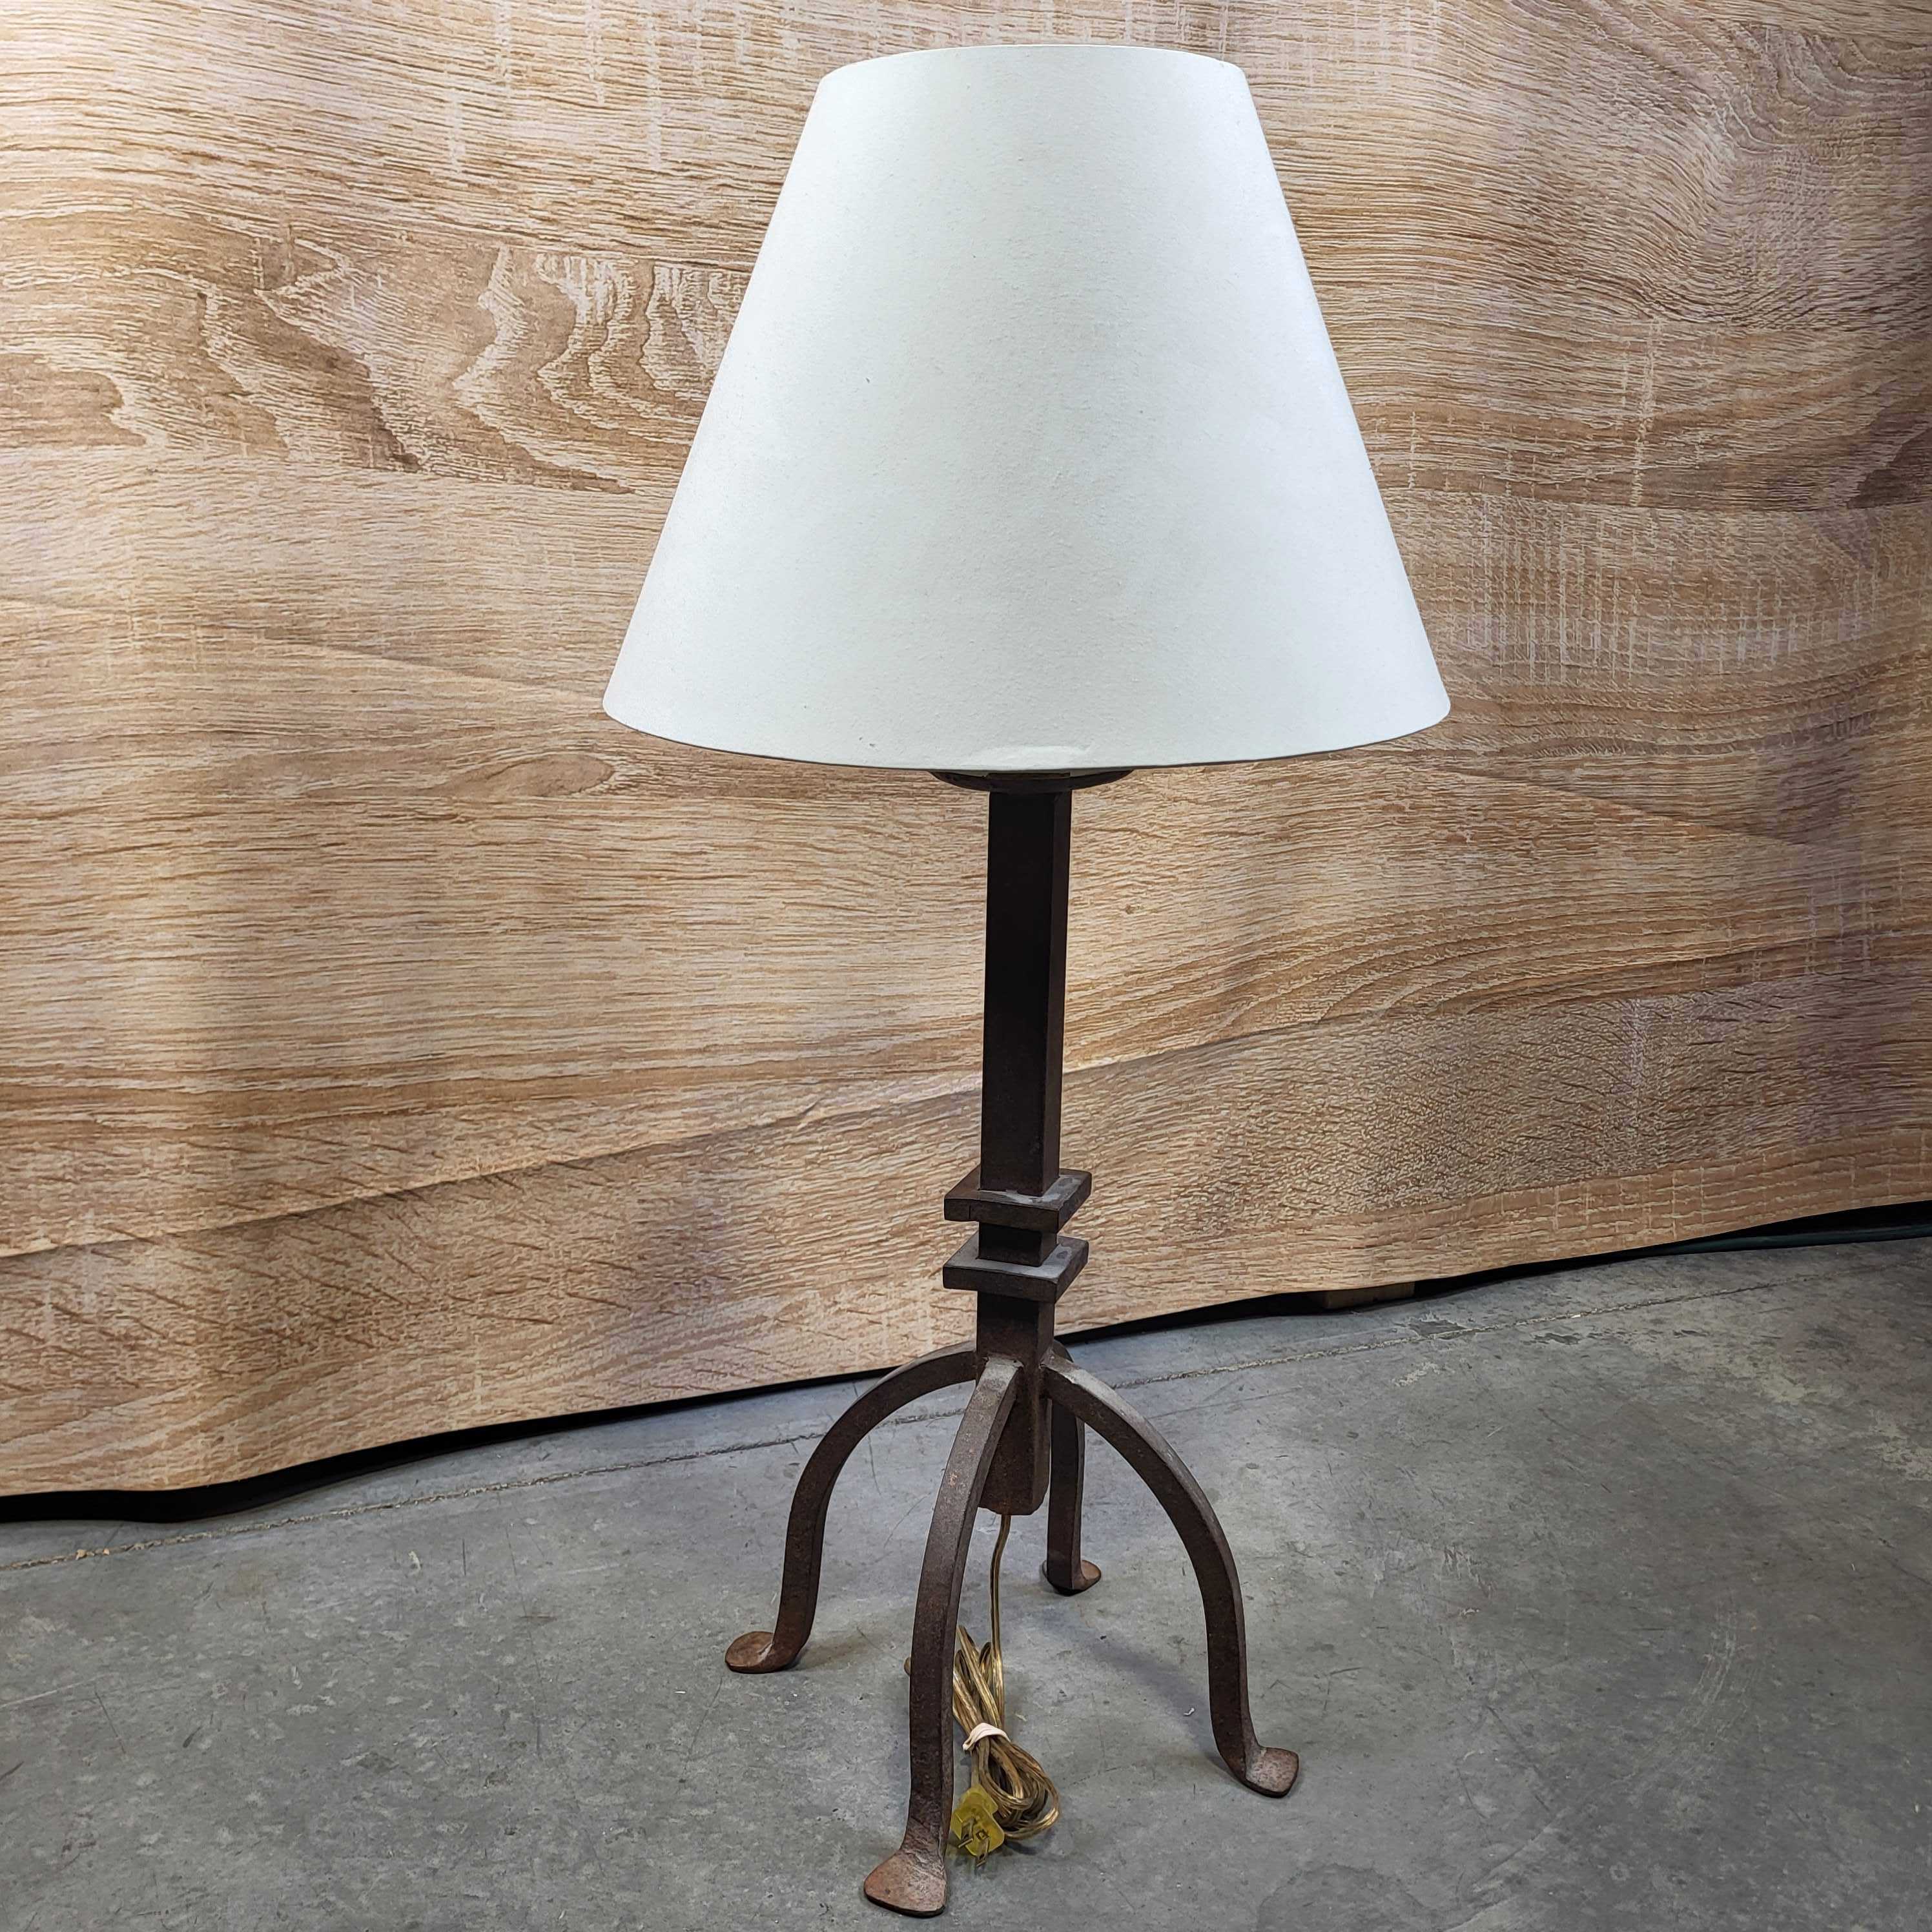 Cast Iron 2 Square Embellishments with Shade Table Lamp